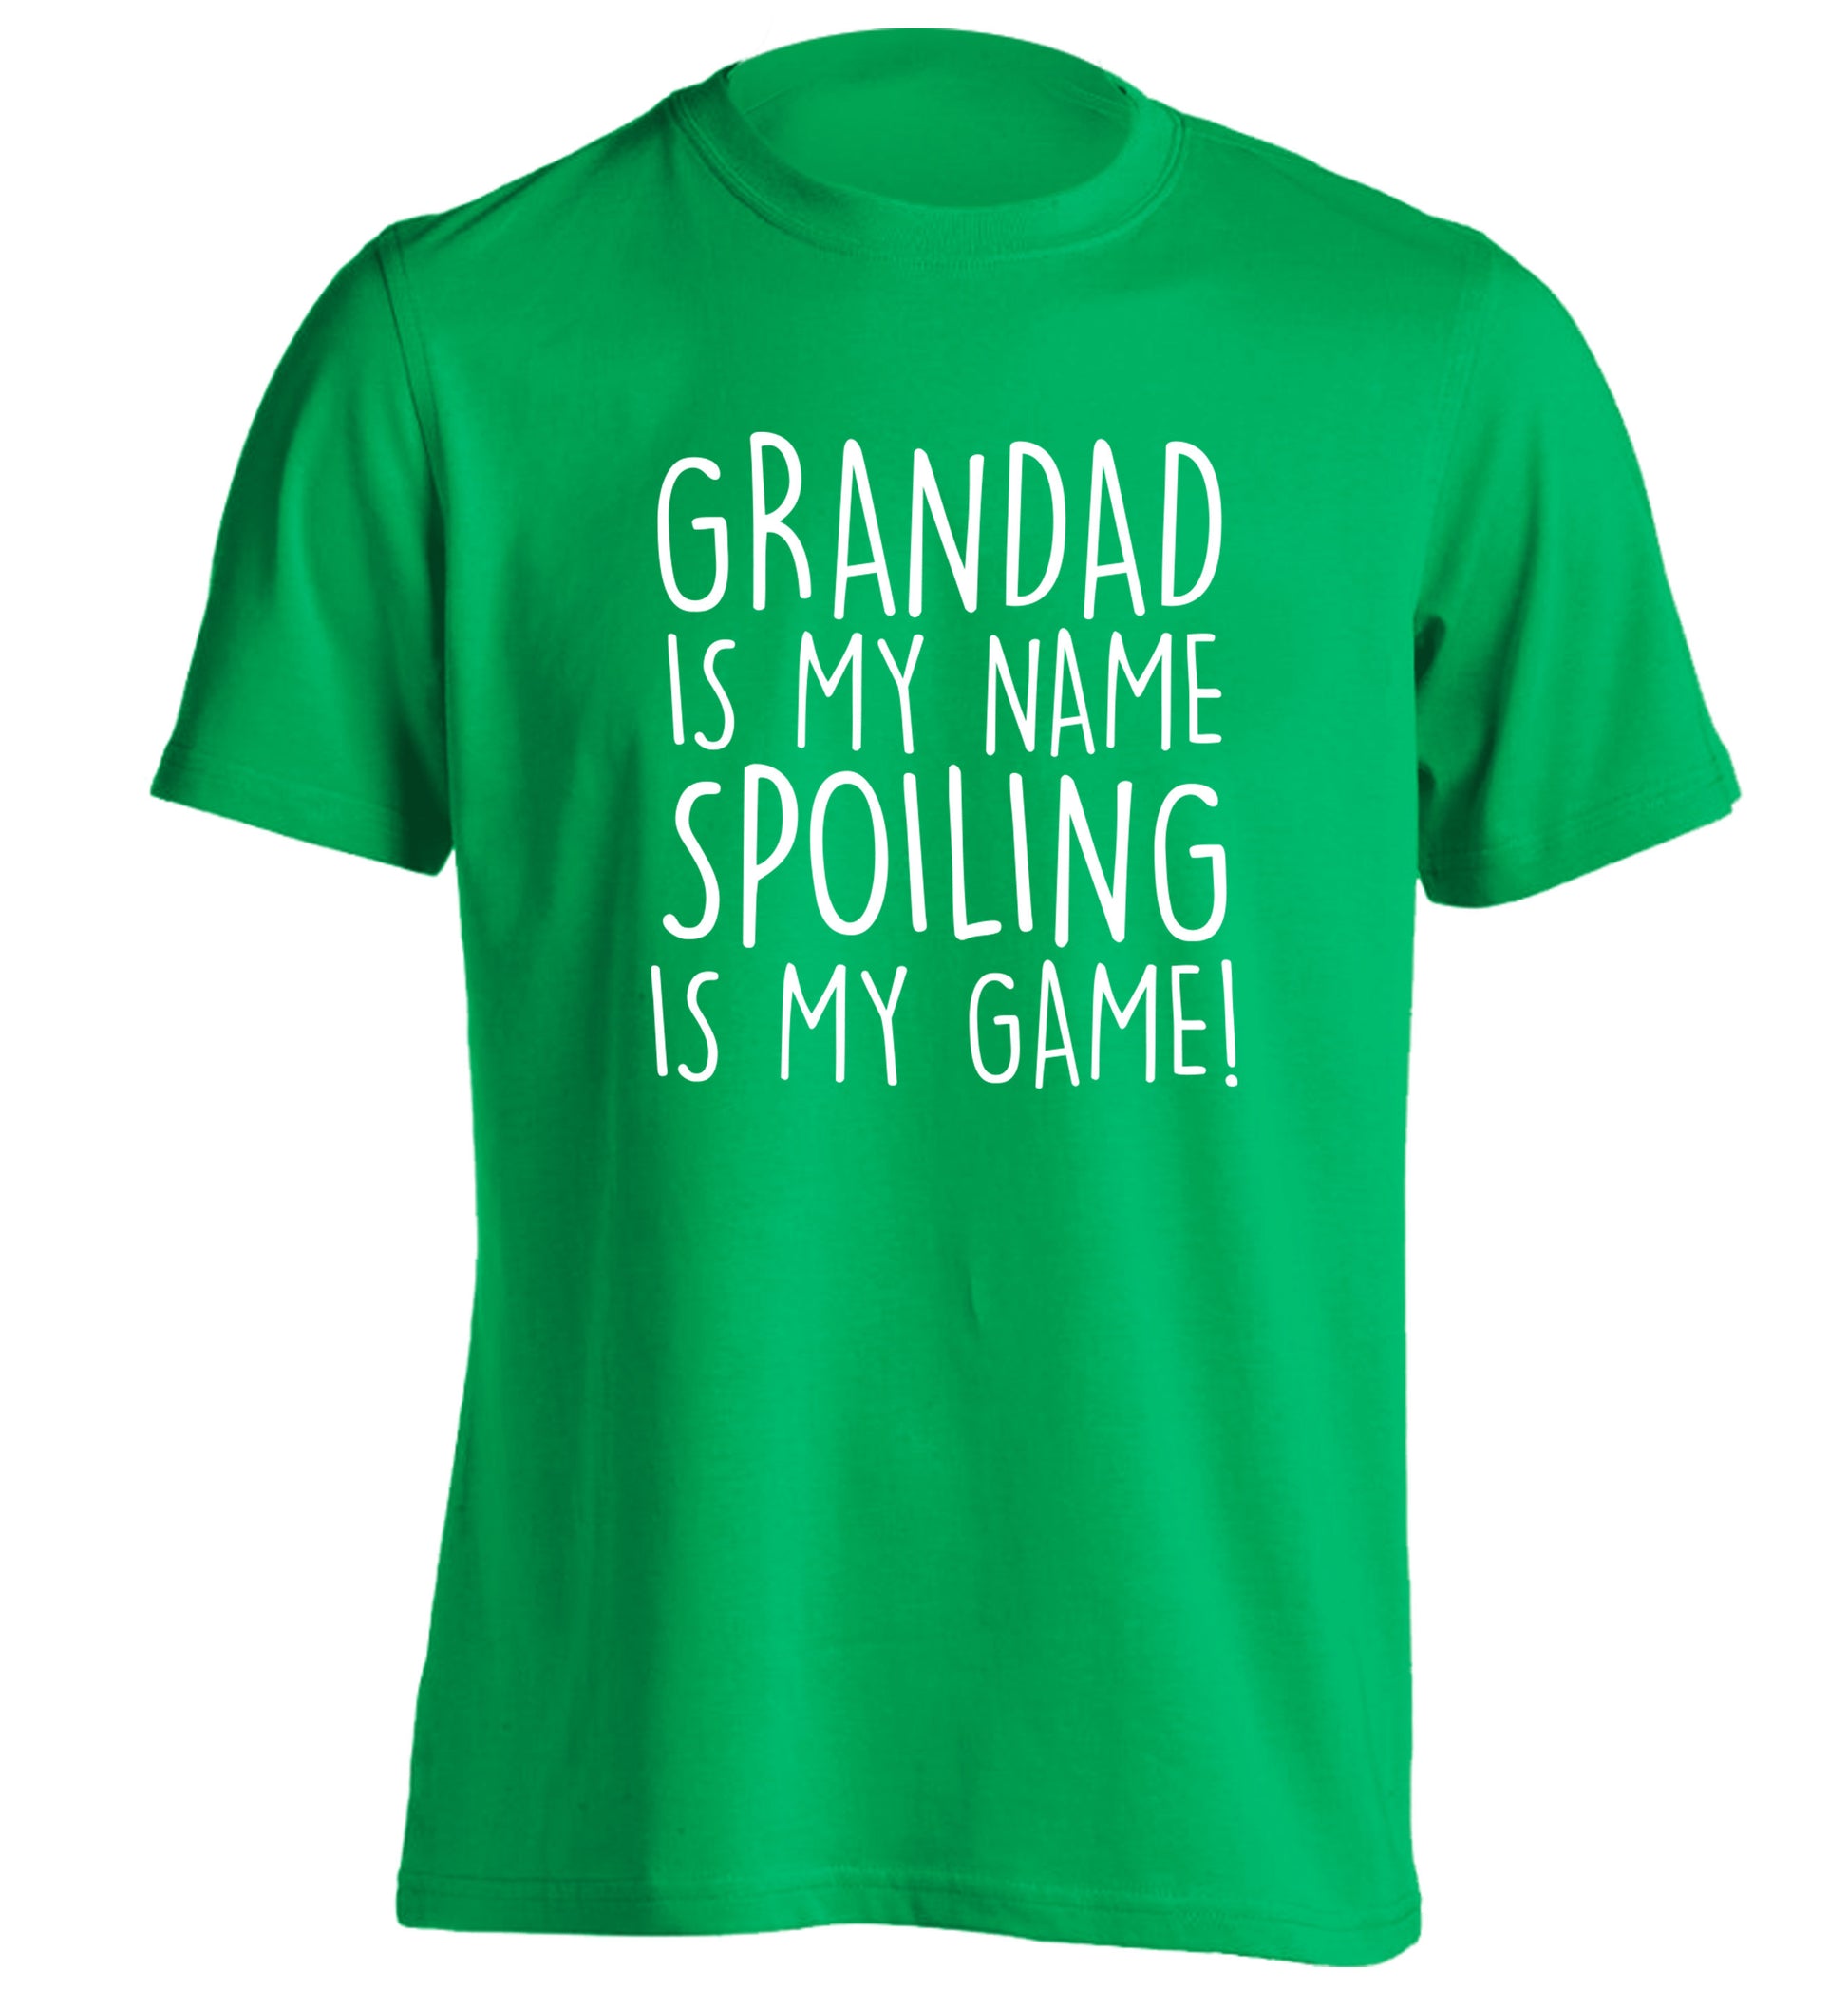 Grandad is my name, spoiling is my game adults unisex green Tshirt 2XL